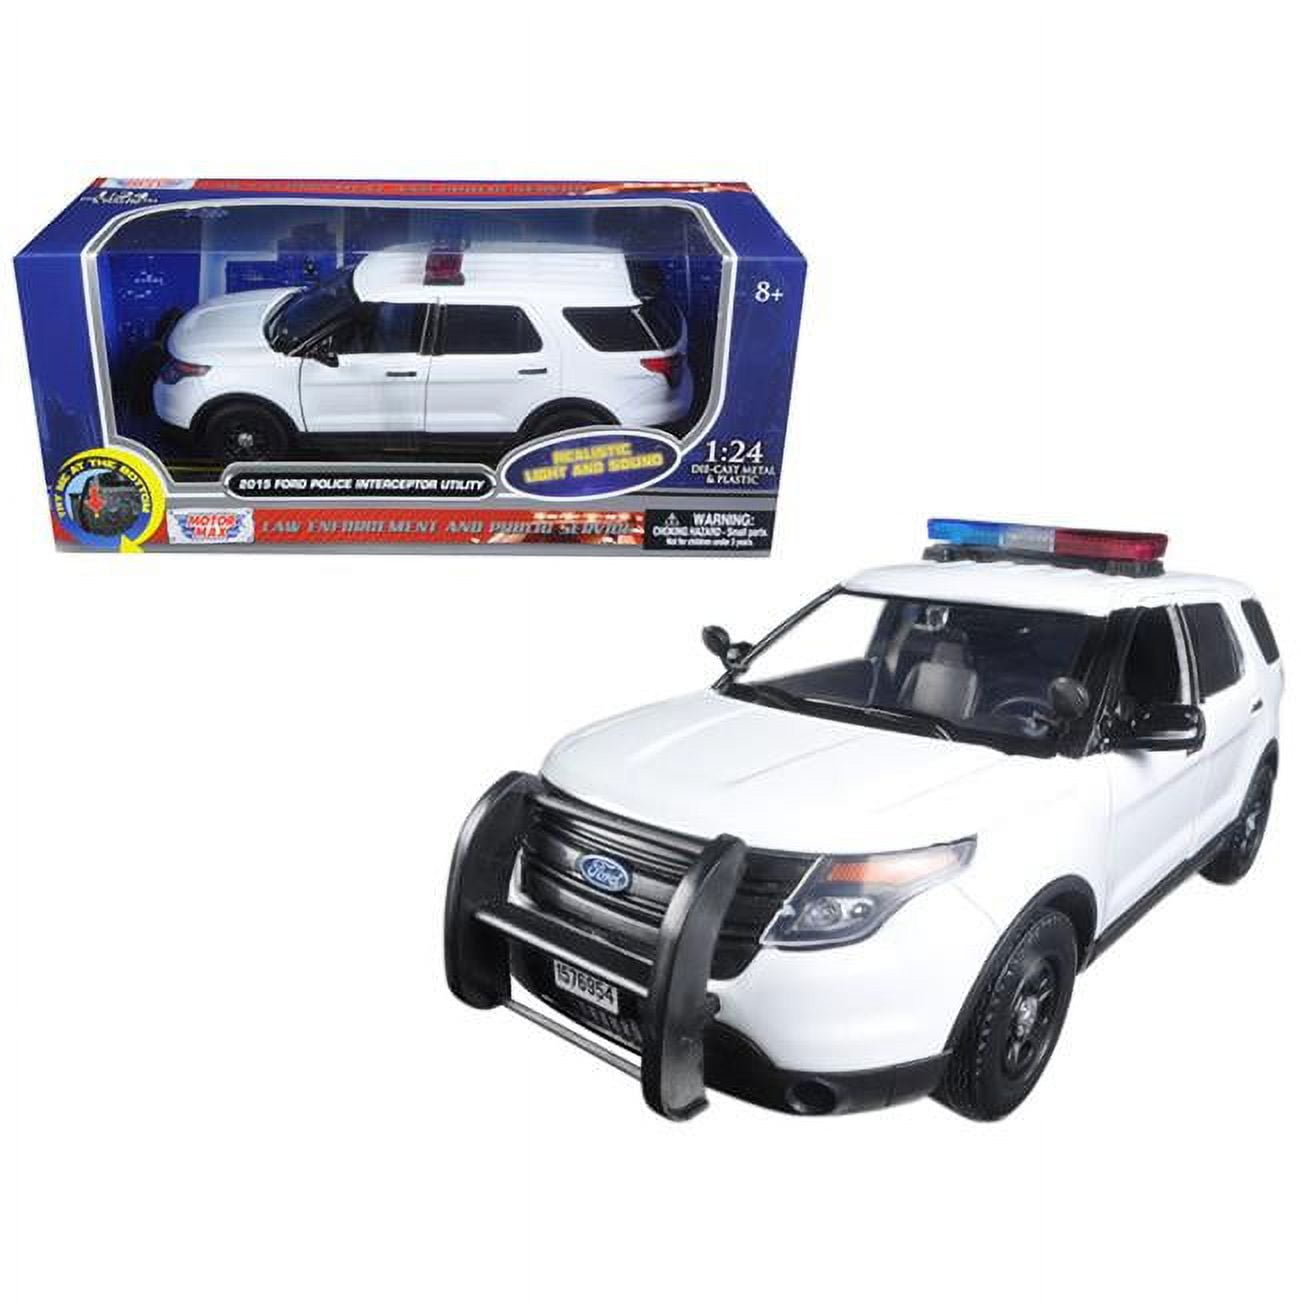 79535 1-24 2015 Ford Police Interceptor Utility Diecast Model Car with Light Bar & Sound - White -  Motormax Toy